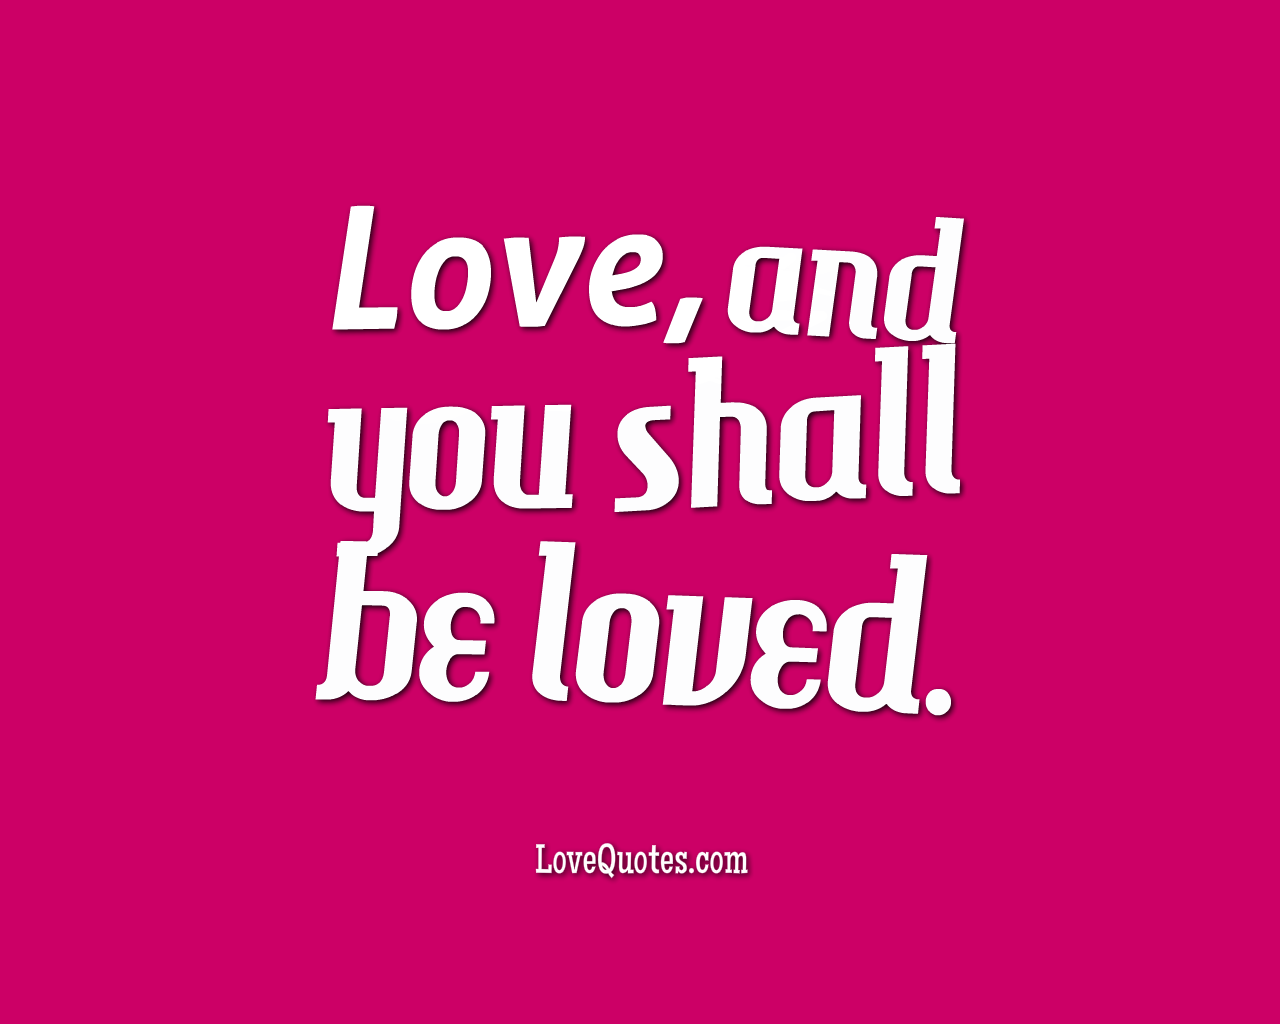 You Shall Be Loved